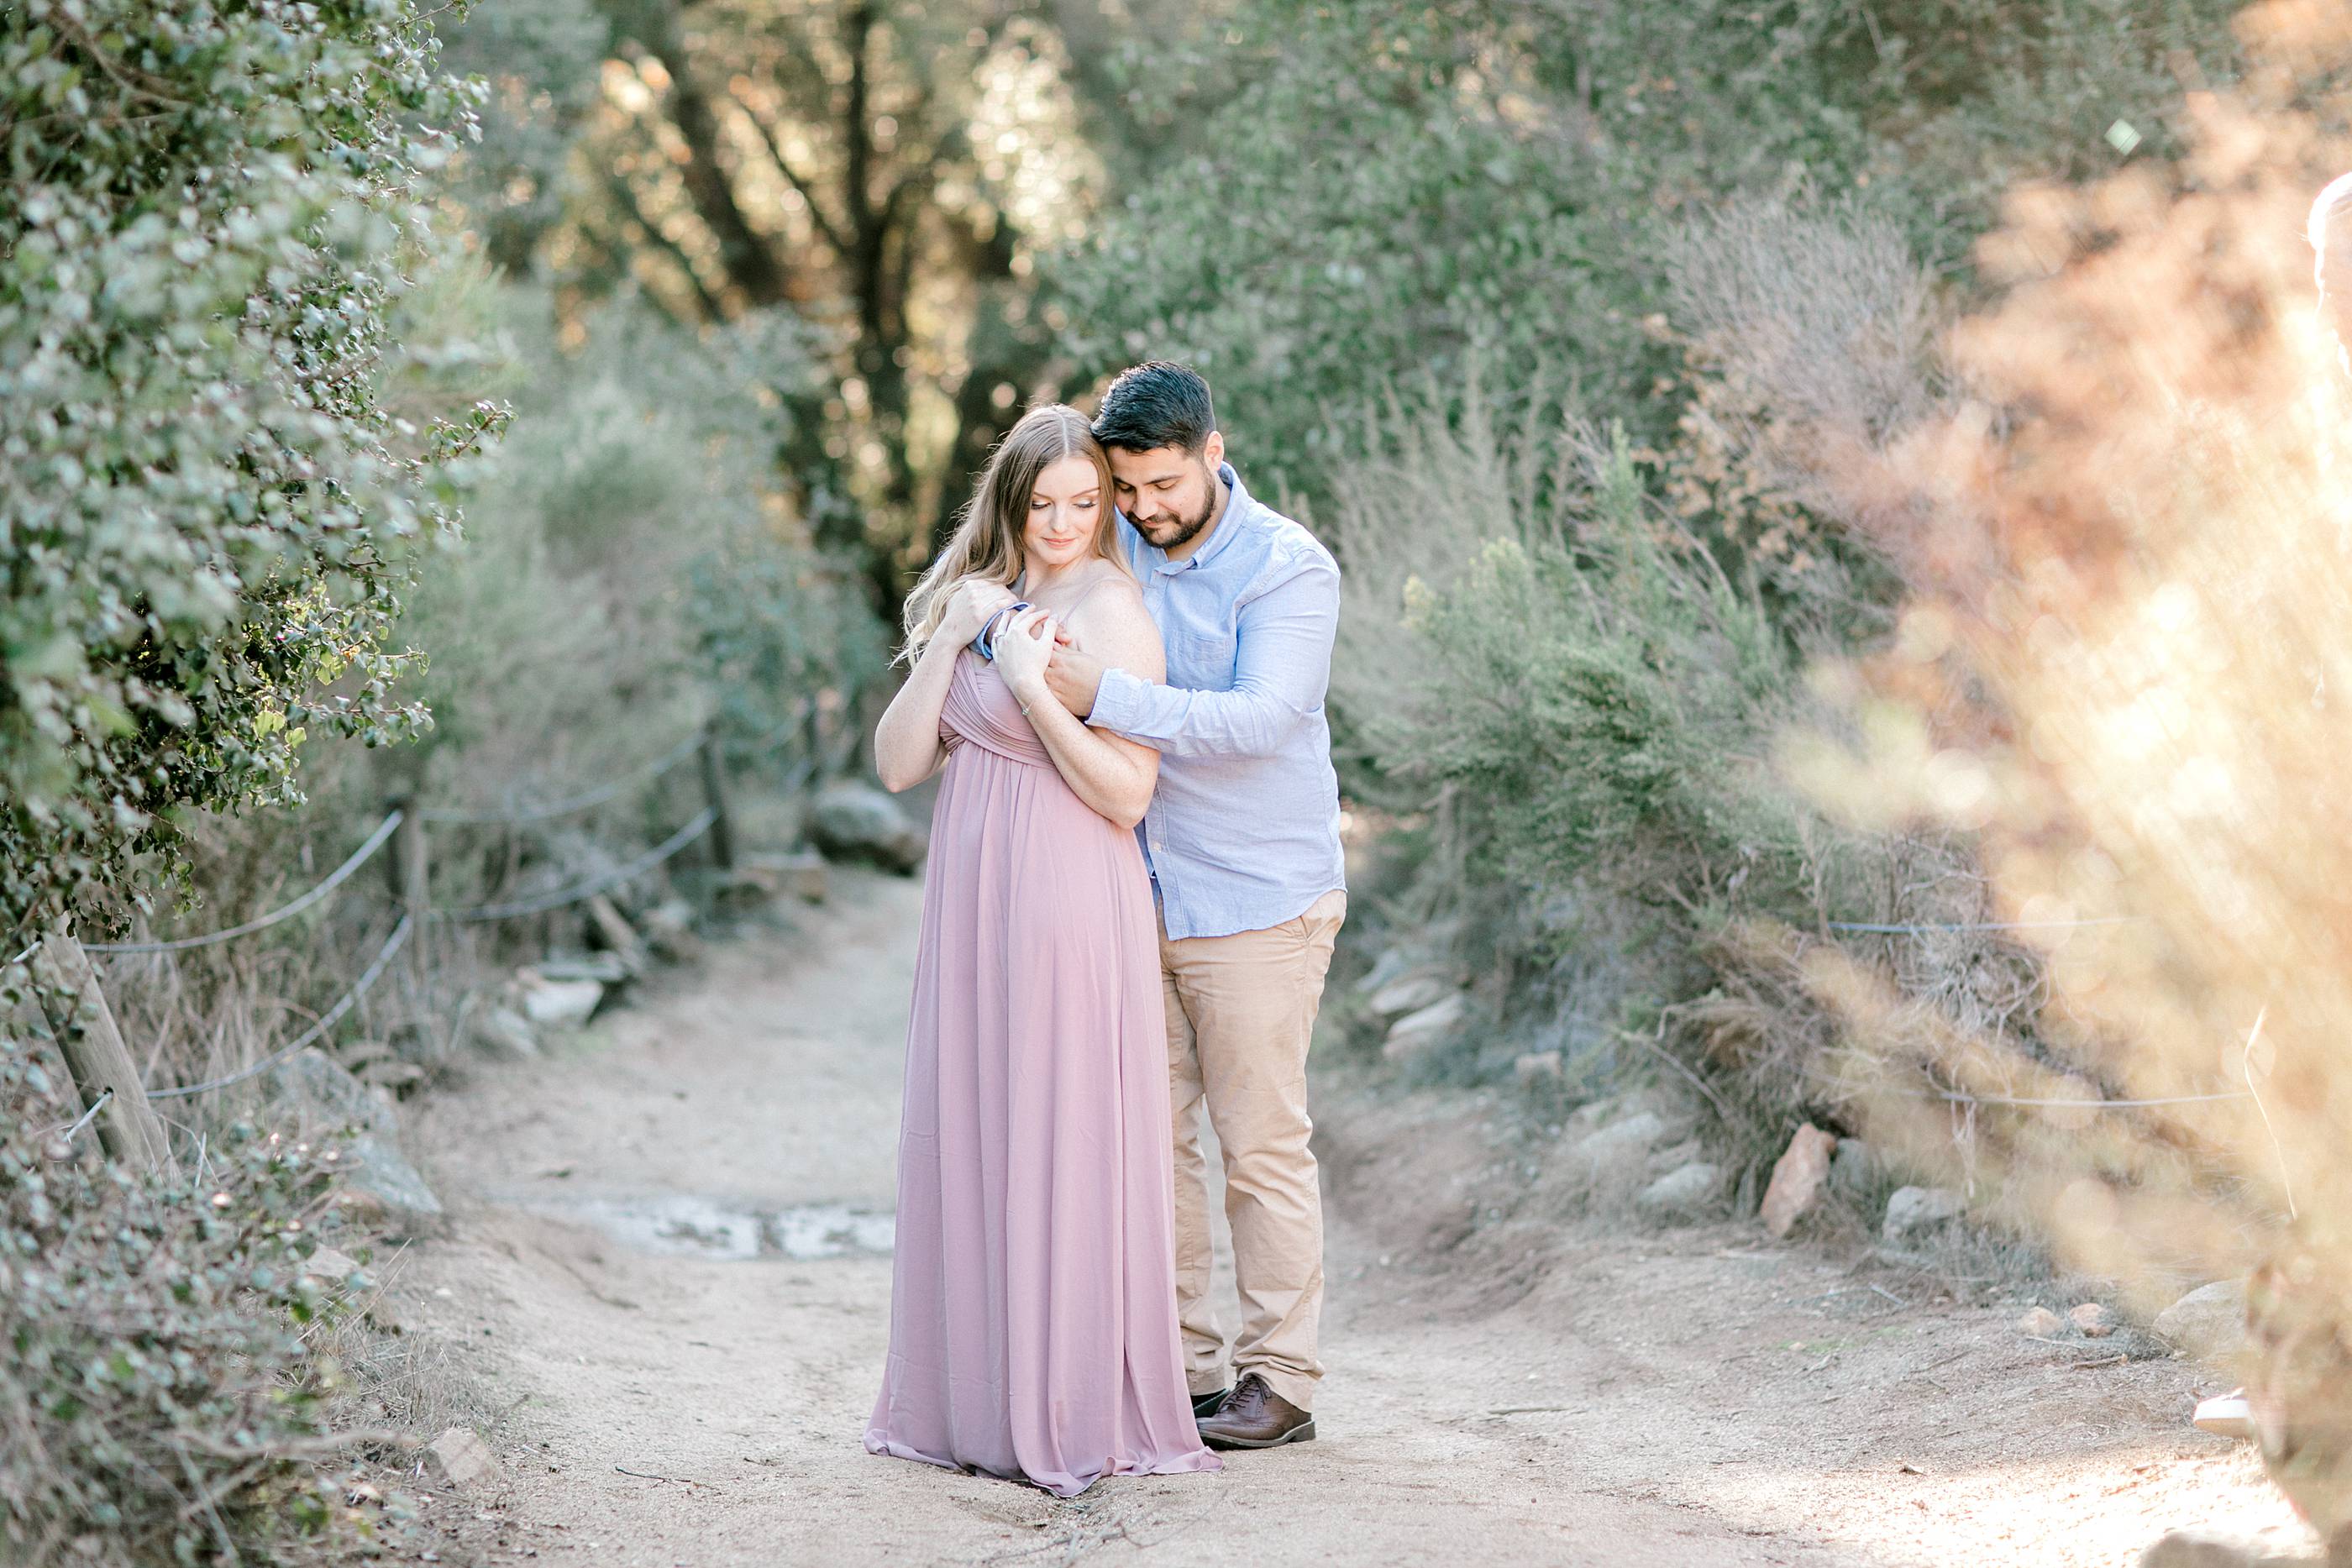 Mauve dress for Forest engagement session in Escondido California by Temecula wedding photographer Carrie Mcguire photography